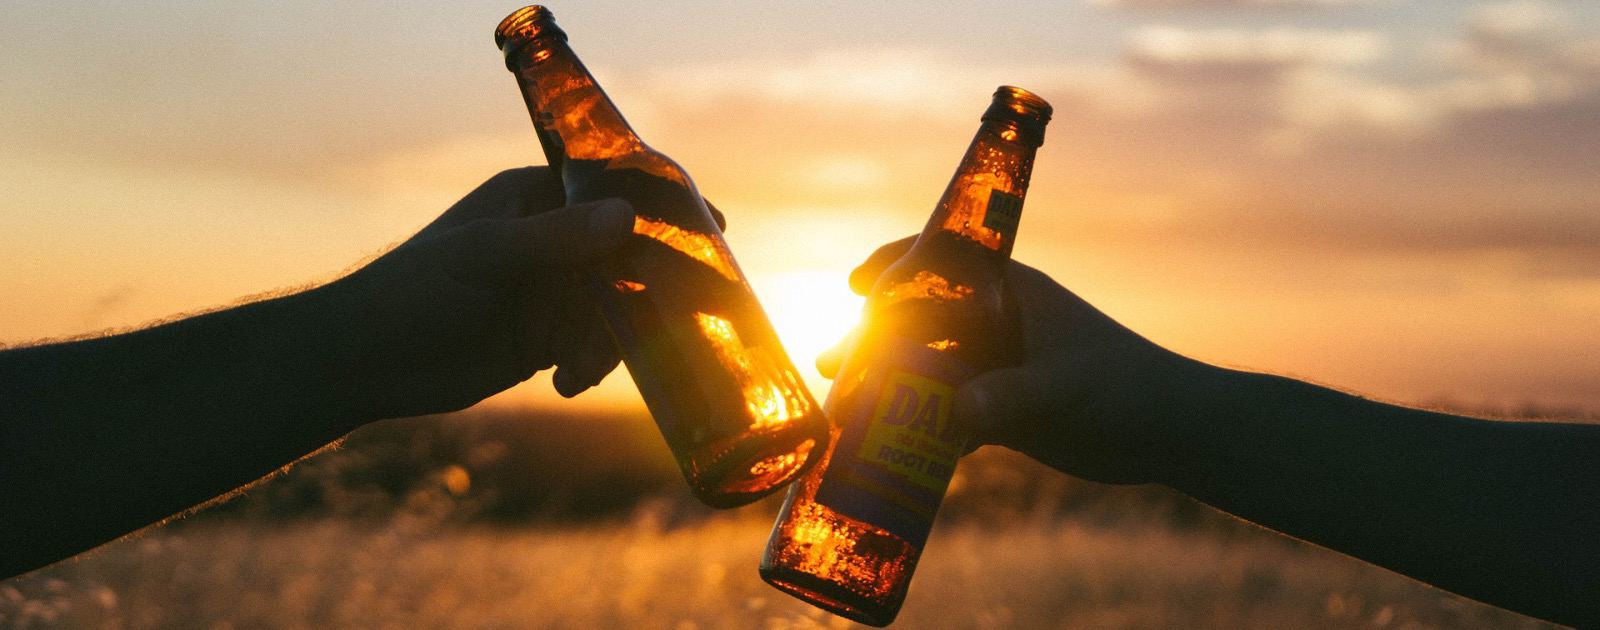 3 Beer Tracking Apps You Can Use to Record Your Favorite Brews